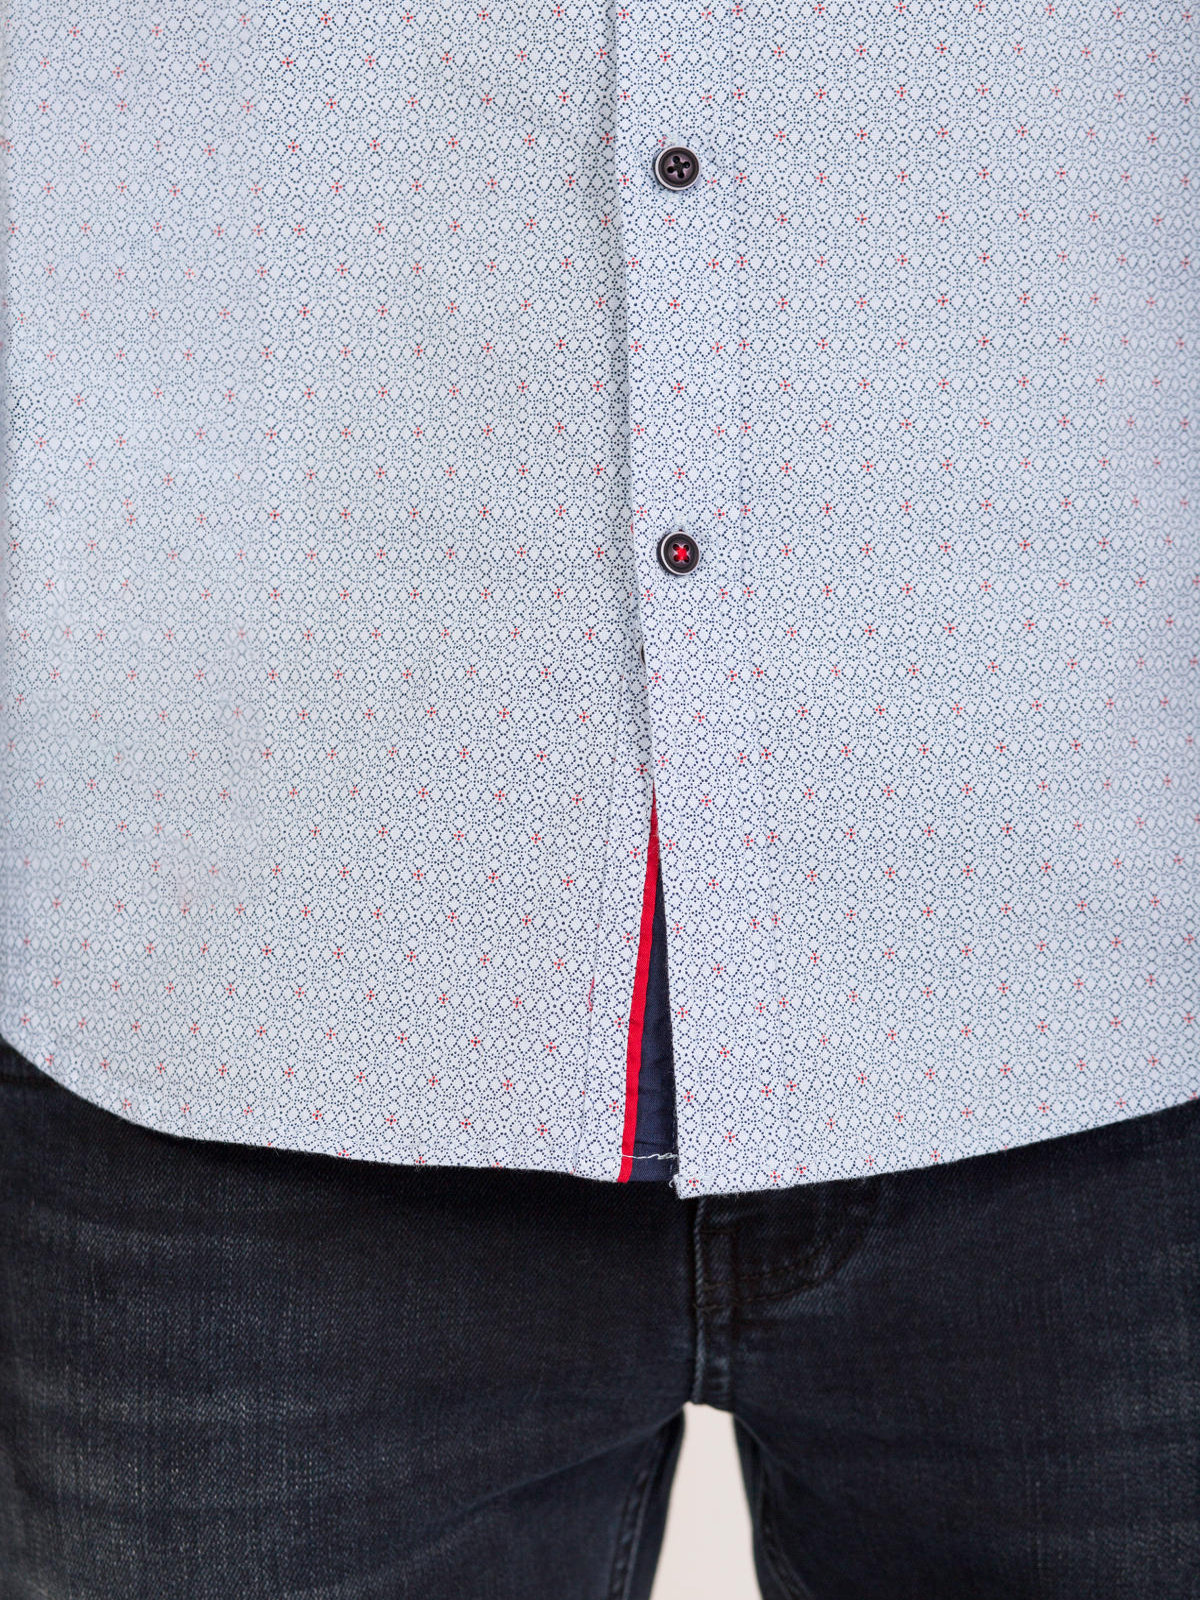 Shirt in blue with small red figures - 21440 € 21.93 img5